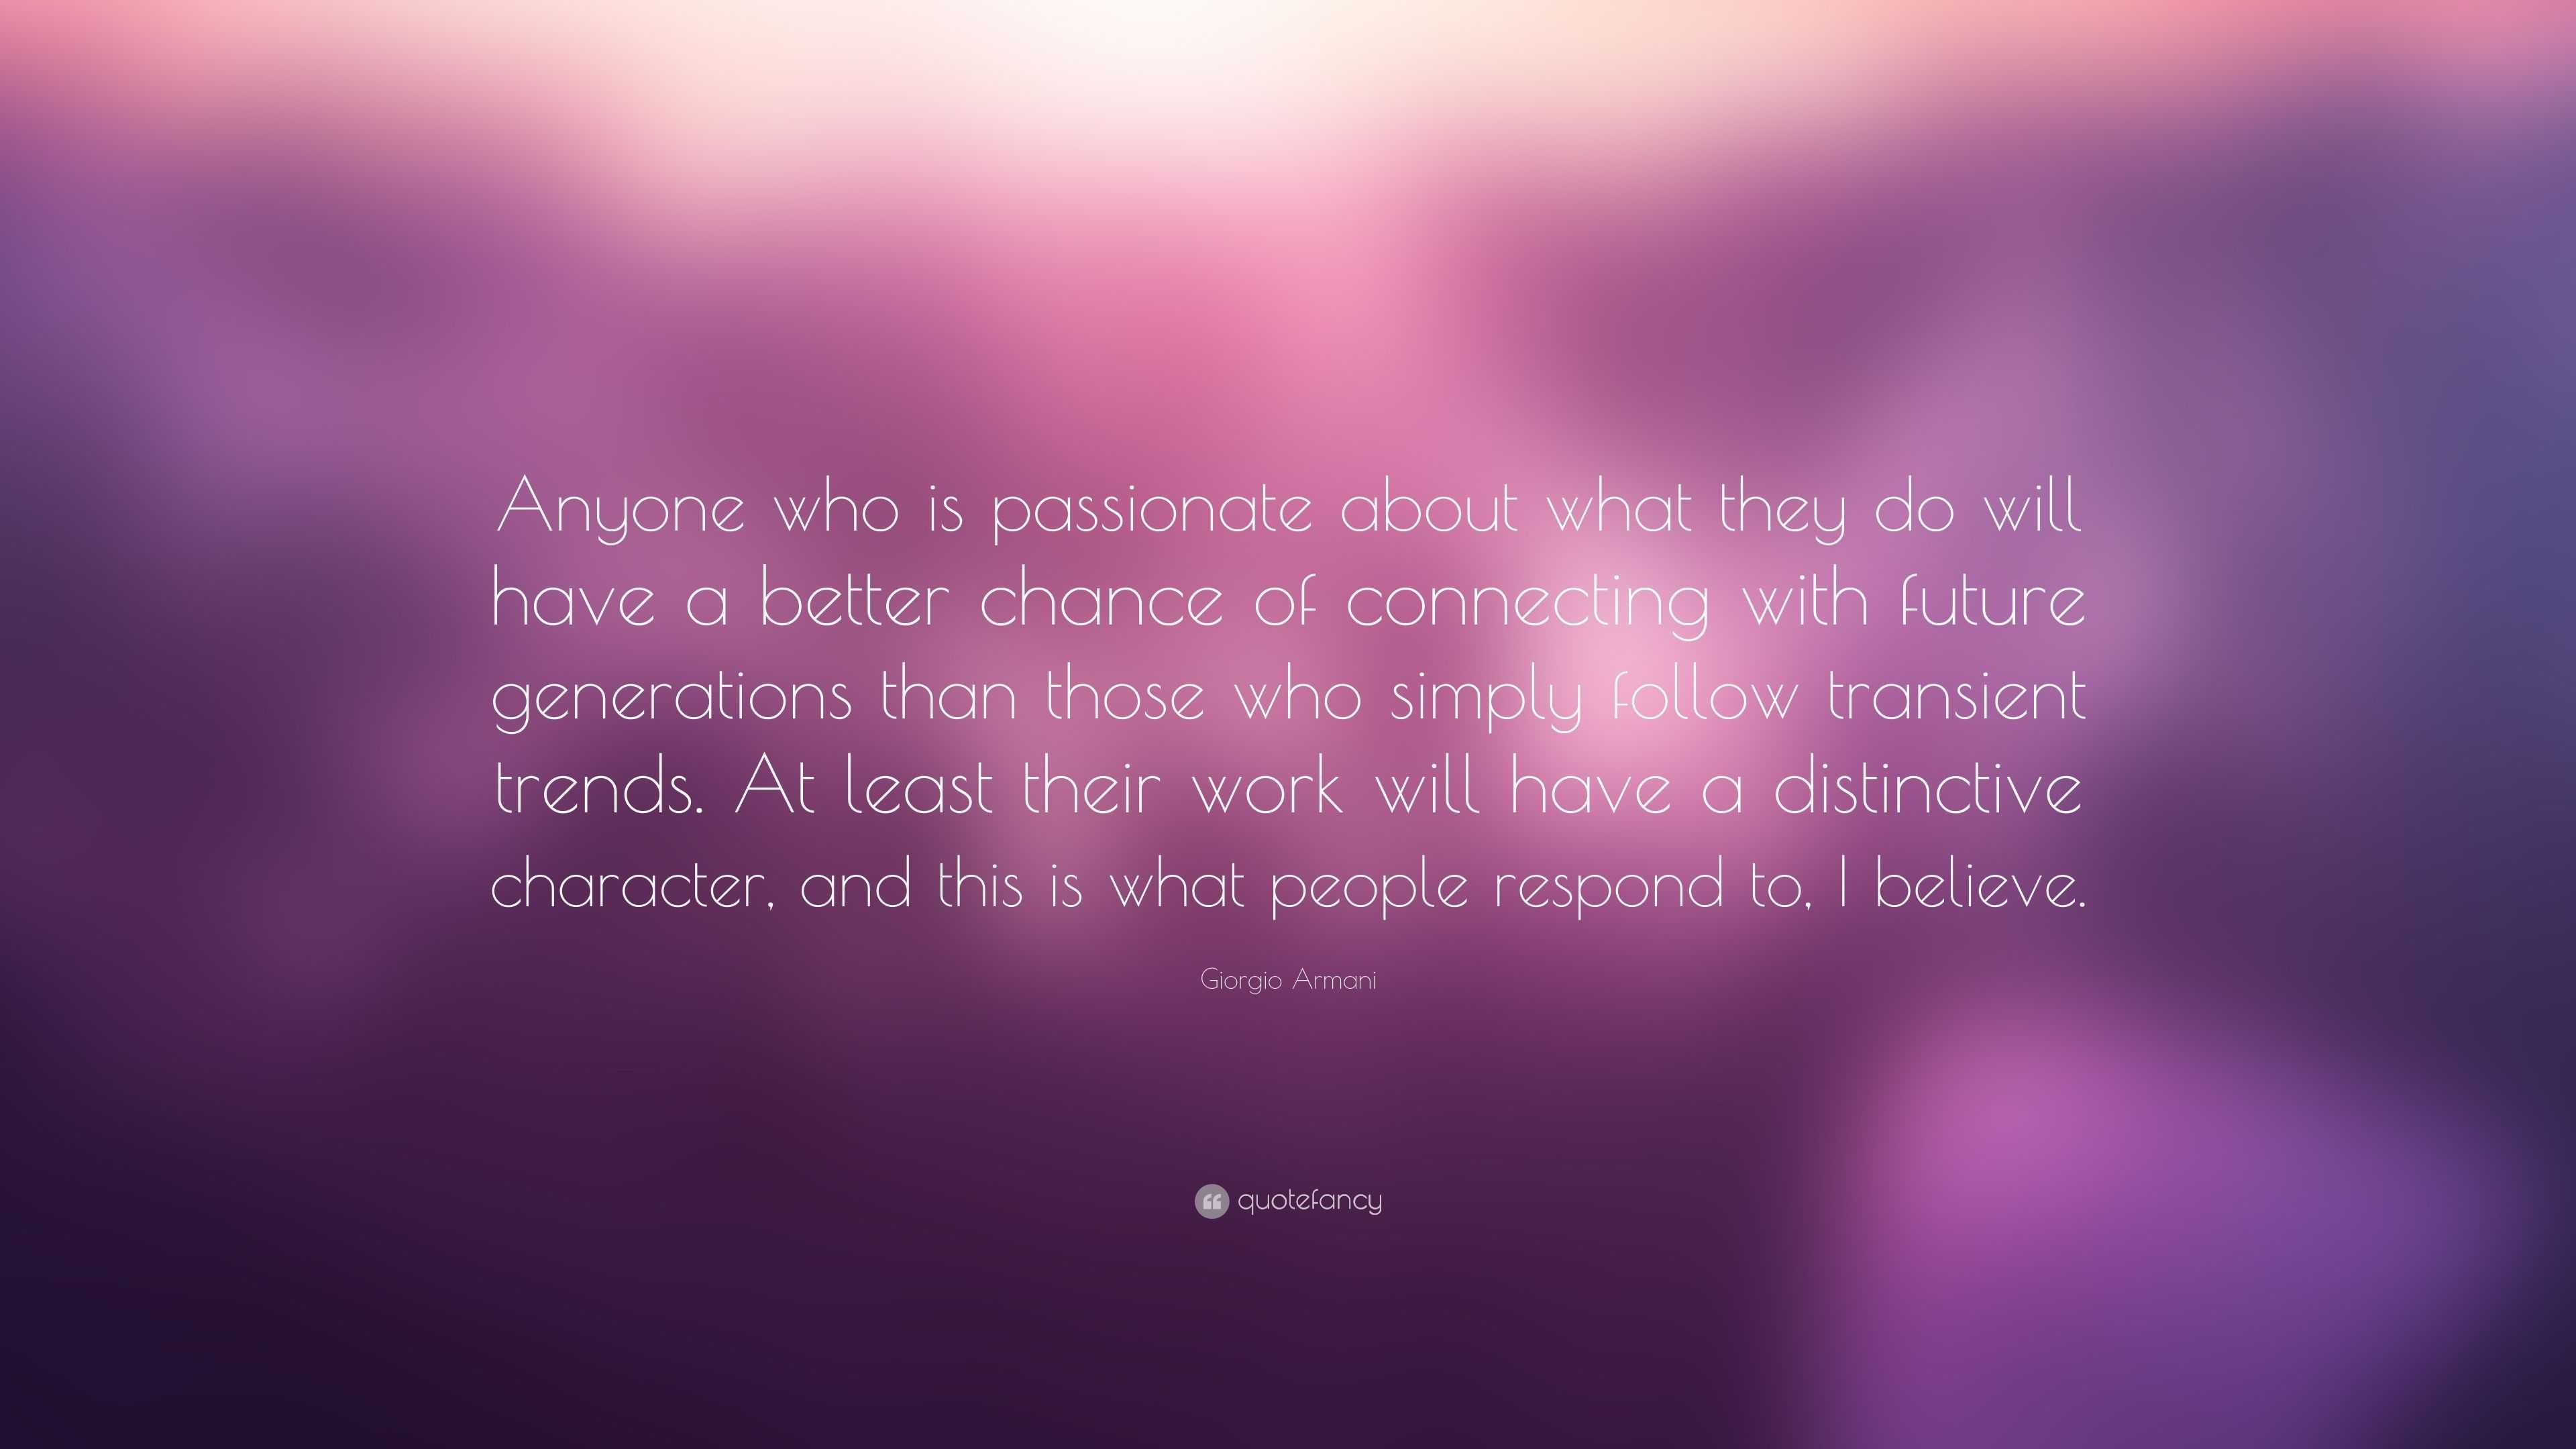 Giorgio Armani Quote: “Anyone who is passionate about what they do will ...